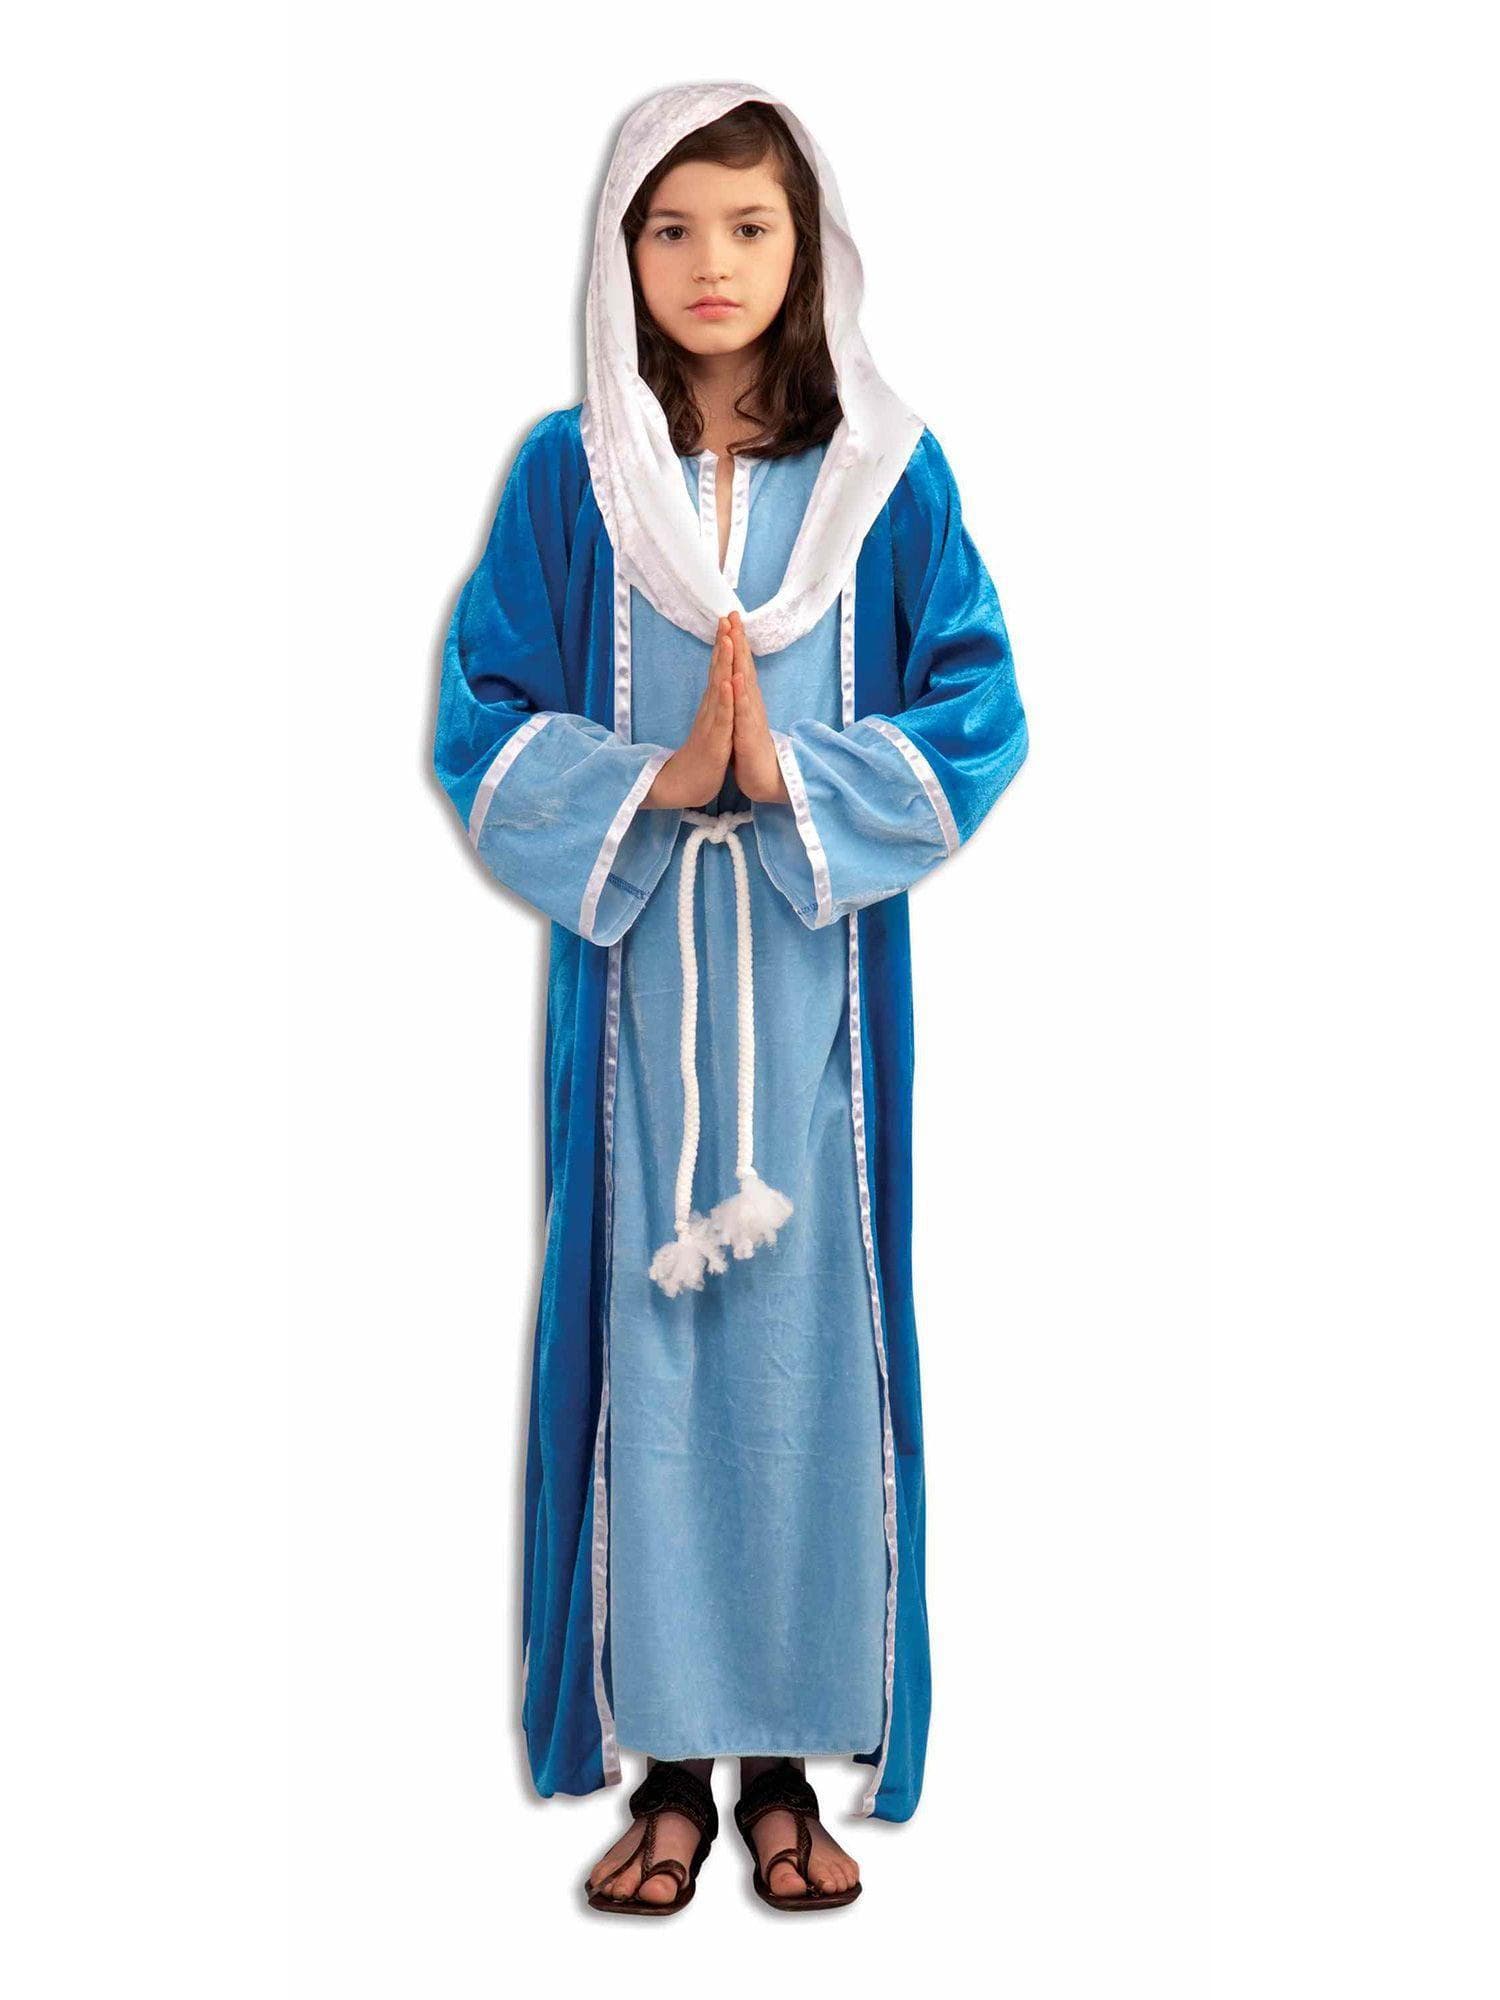 Kid's Deluxe Mary Costume - costumes.com